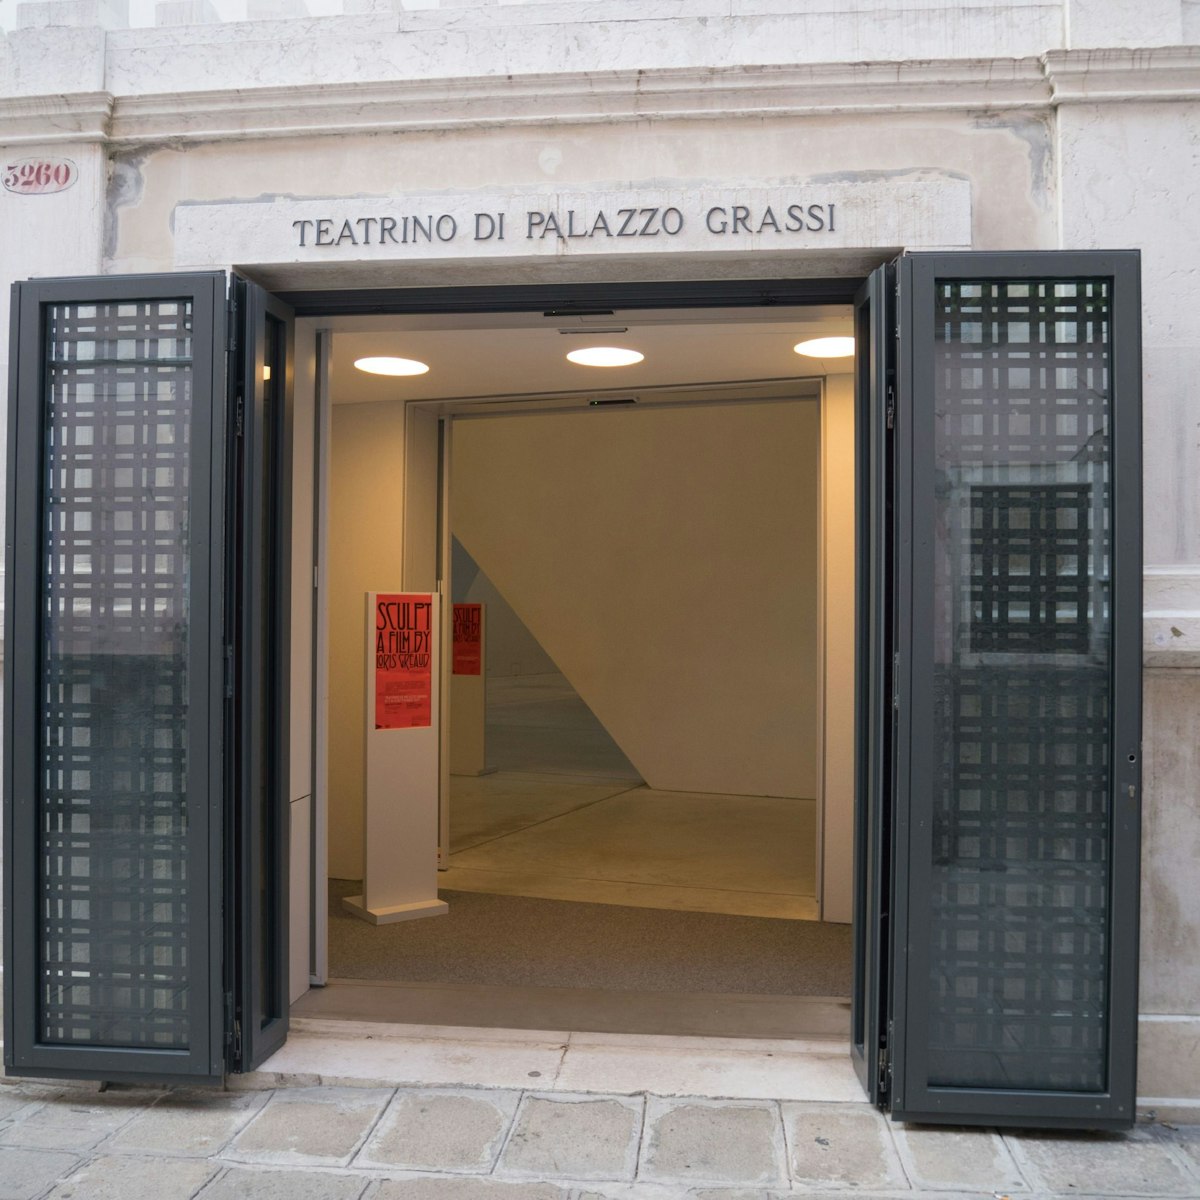 The gated entrance designed by Tadao Ando to the Teatrino Palazzo Grassi